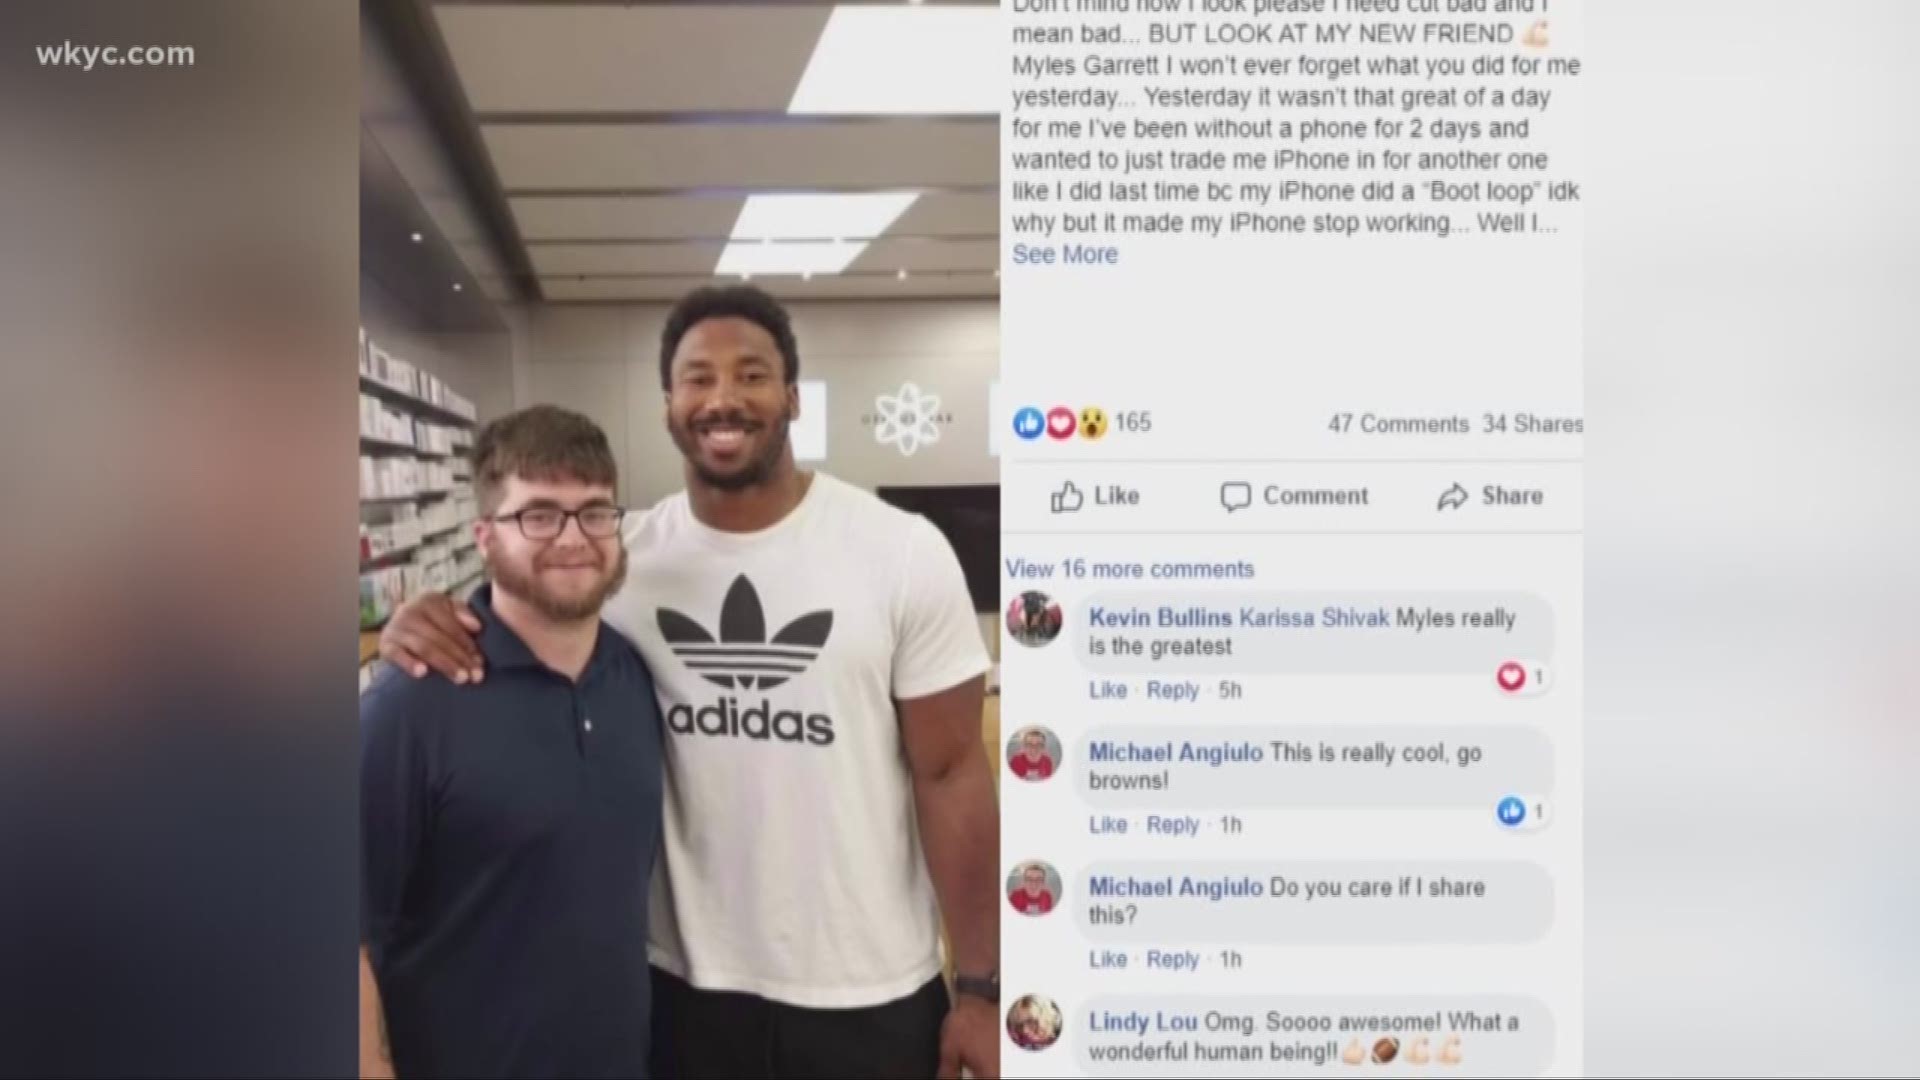 One Cleveland Browns fan found himself in the right place at the right time when he ran into Myles Garrett on Wednesday.